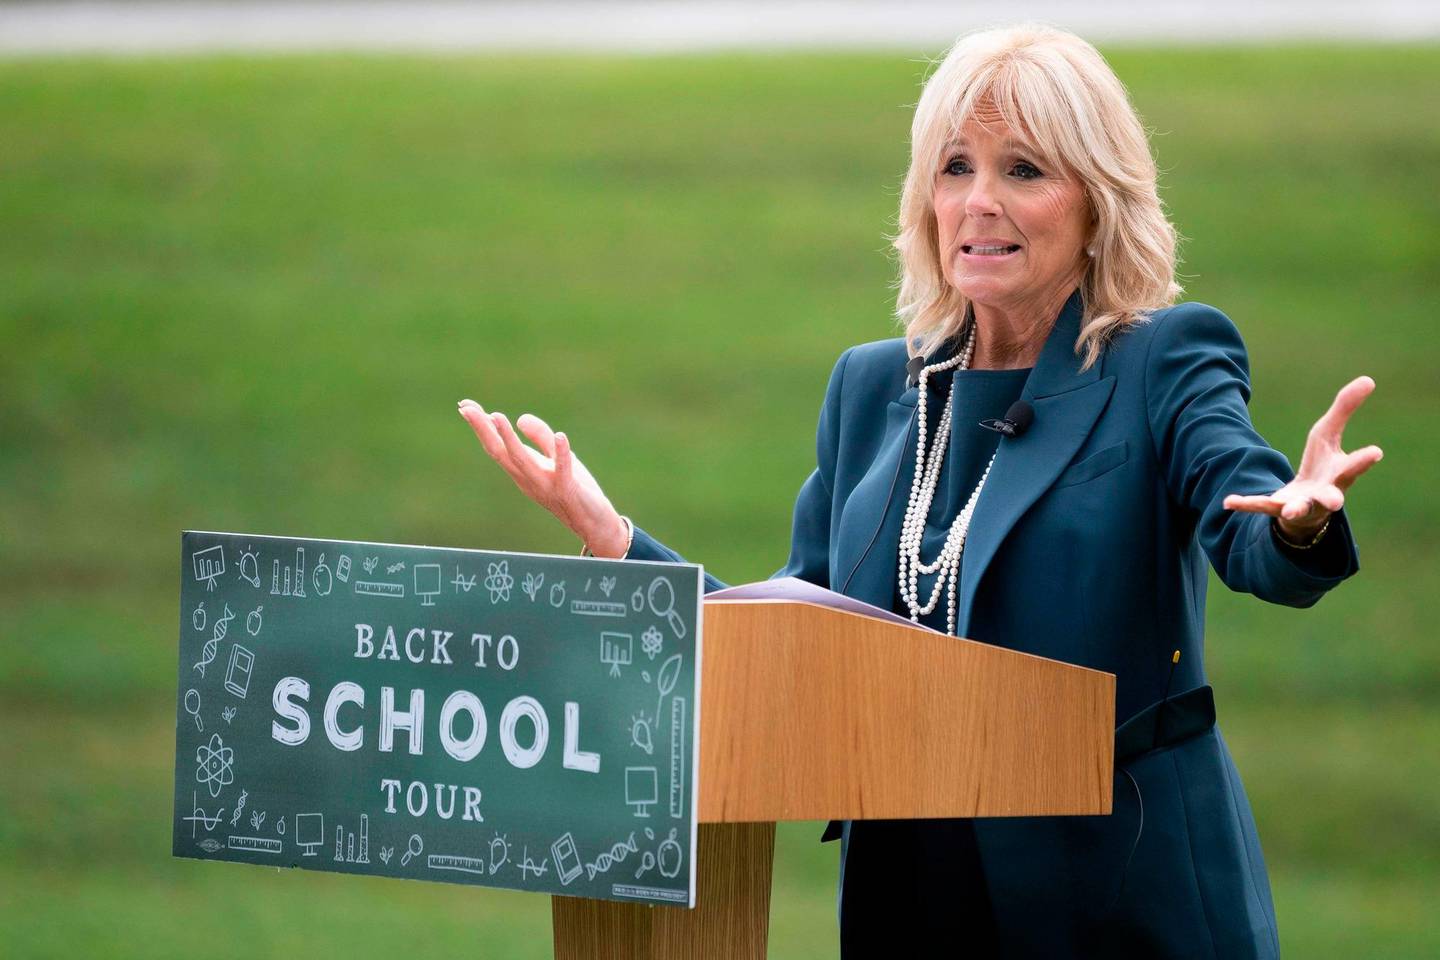 Jill Biden, the wife of Democratic presidential candidate Joe Biden, speaks during a Back to School Tour at Shortlidge Academy in Wilmington, Delaware, on September 1, 2020. (Photo by JIM WATSON / AFP)